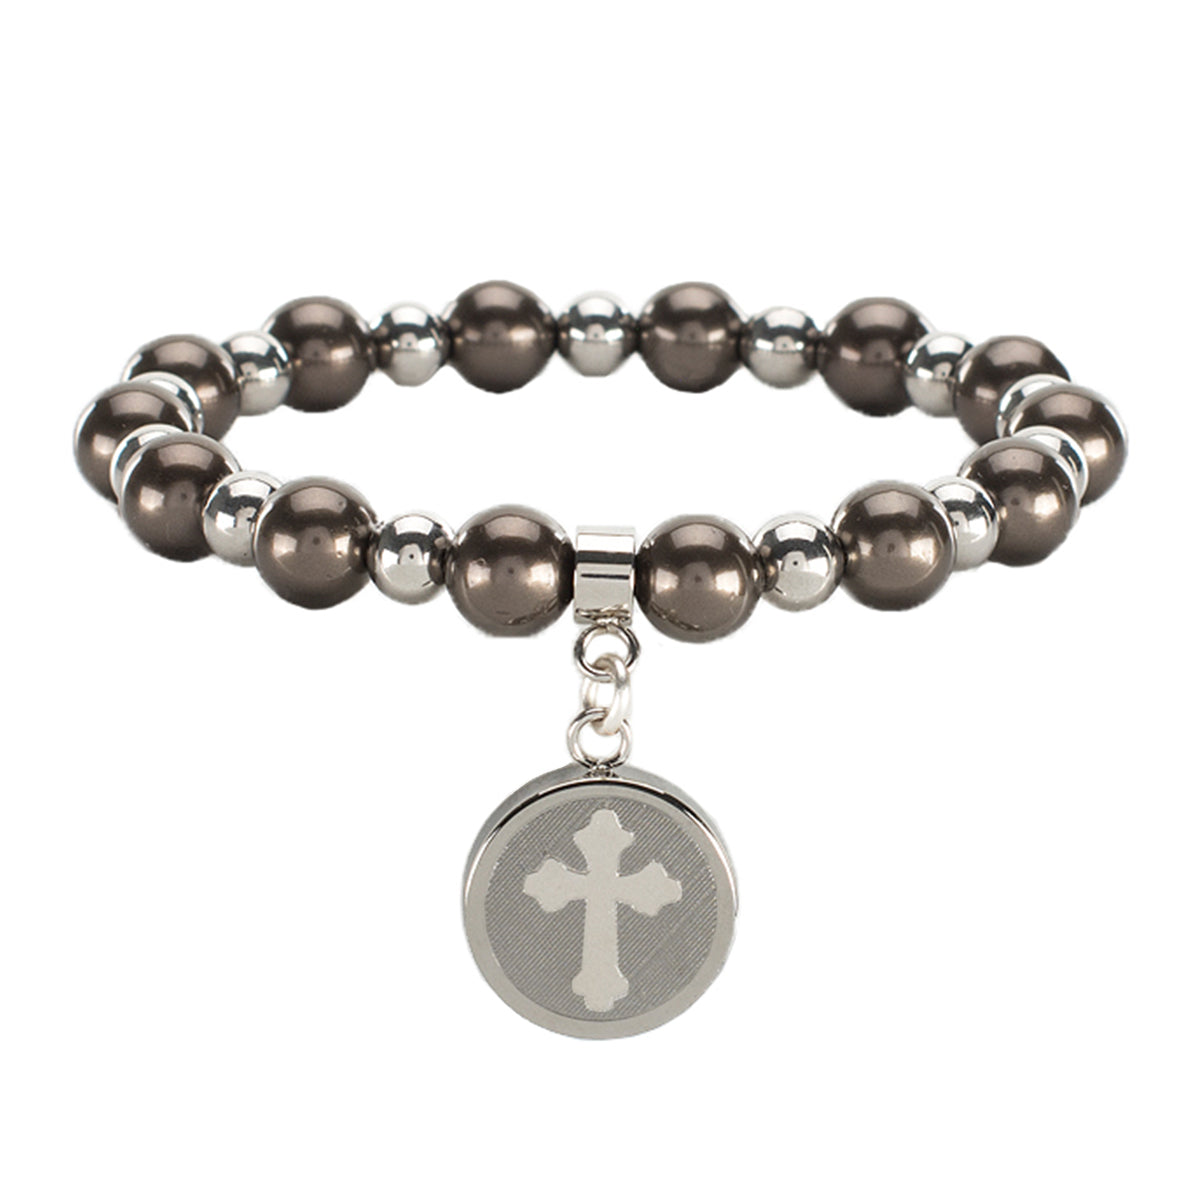 Allison Pearl Cross - Brown with Silver